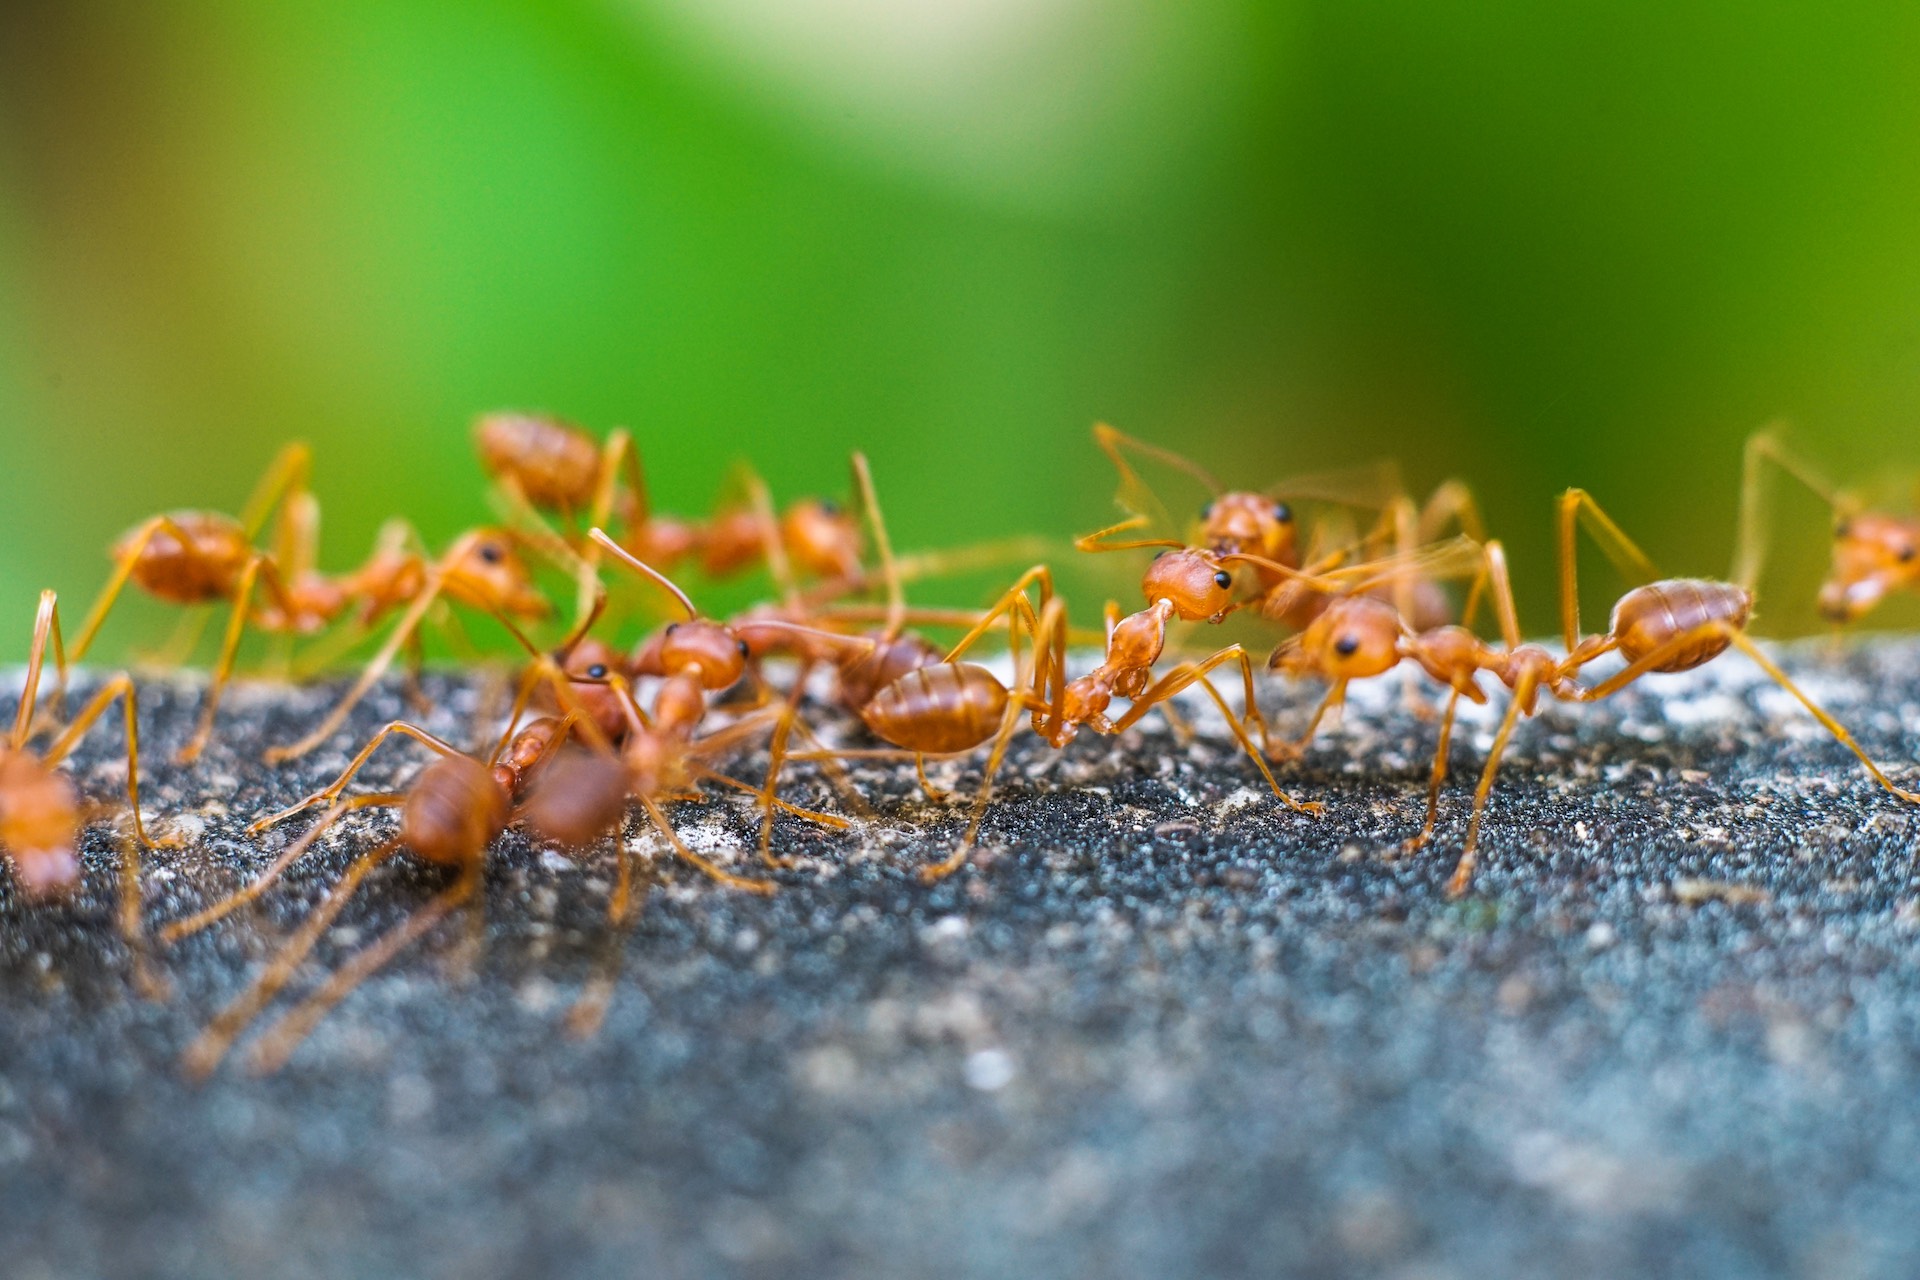 Fire ants are taking advantage of Australian flooding to colonize new areas